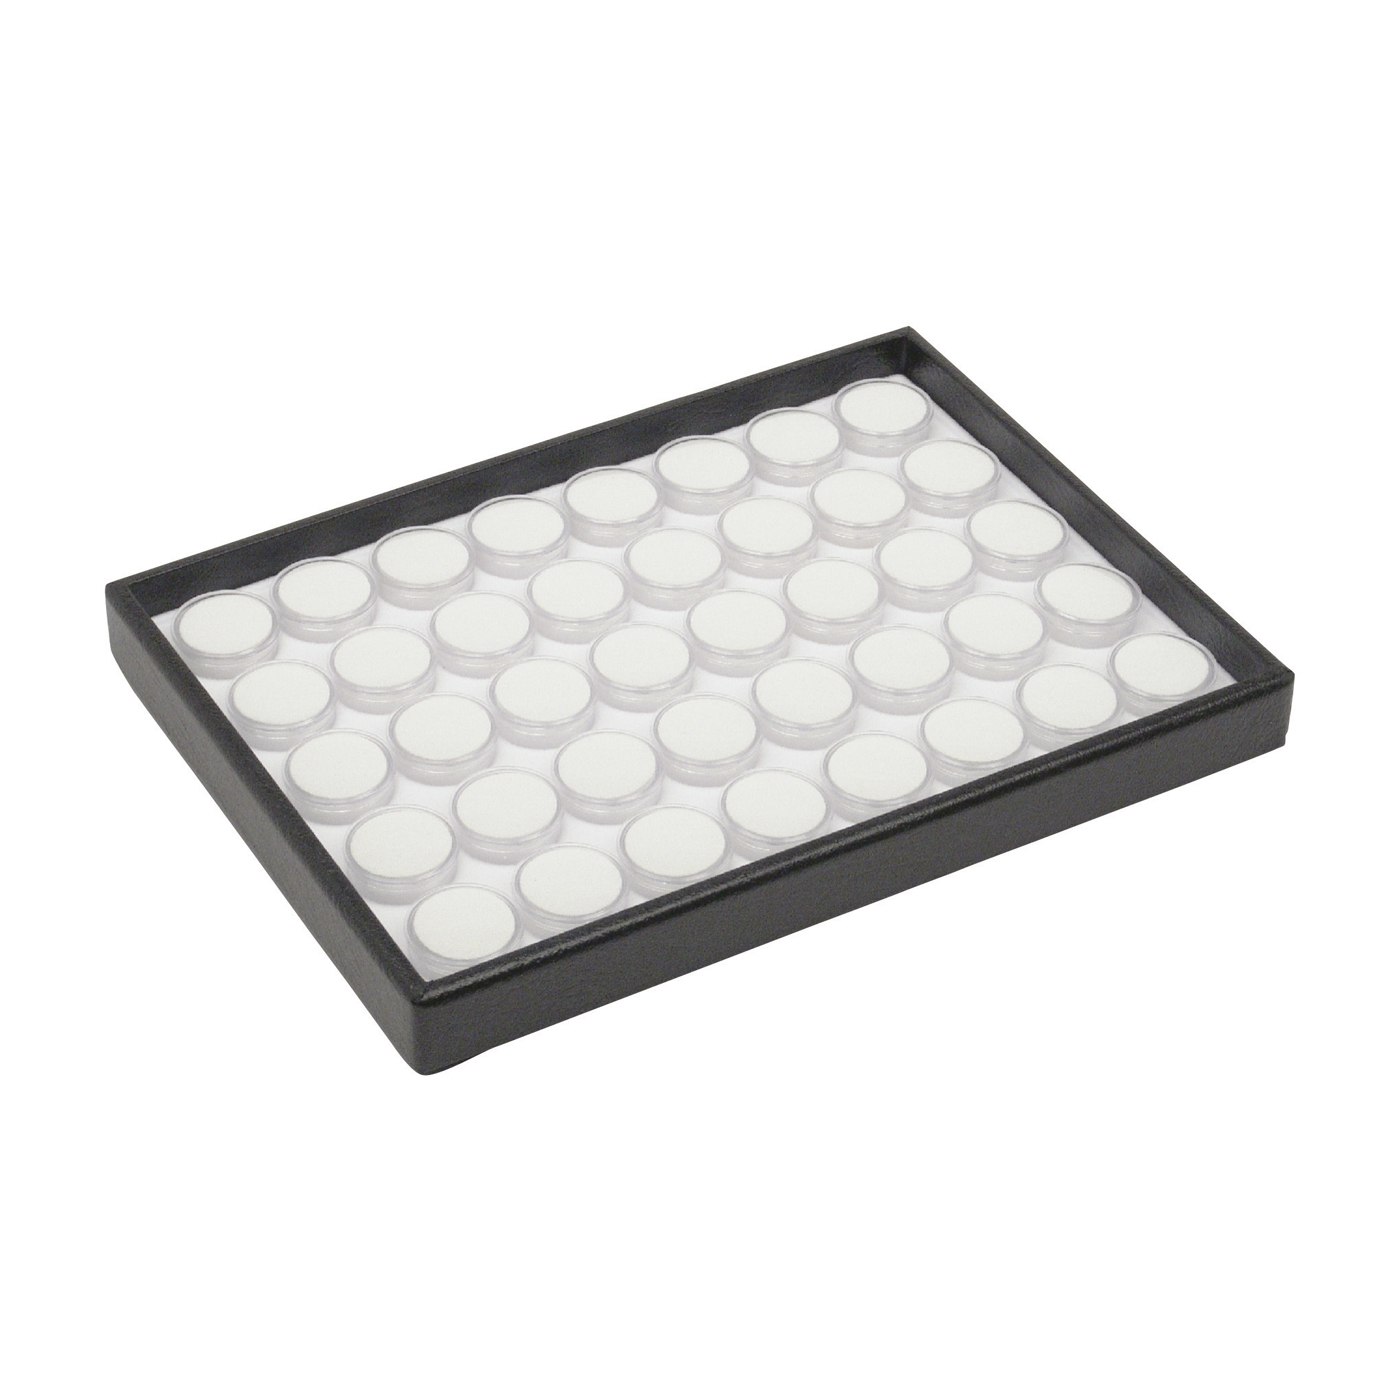 Stacking Tray with 40 Plastic Cans, Round, 280 x 210 x 25 mm - 1 piece